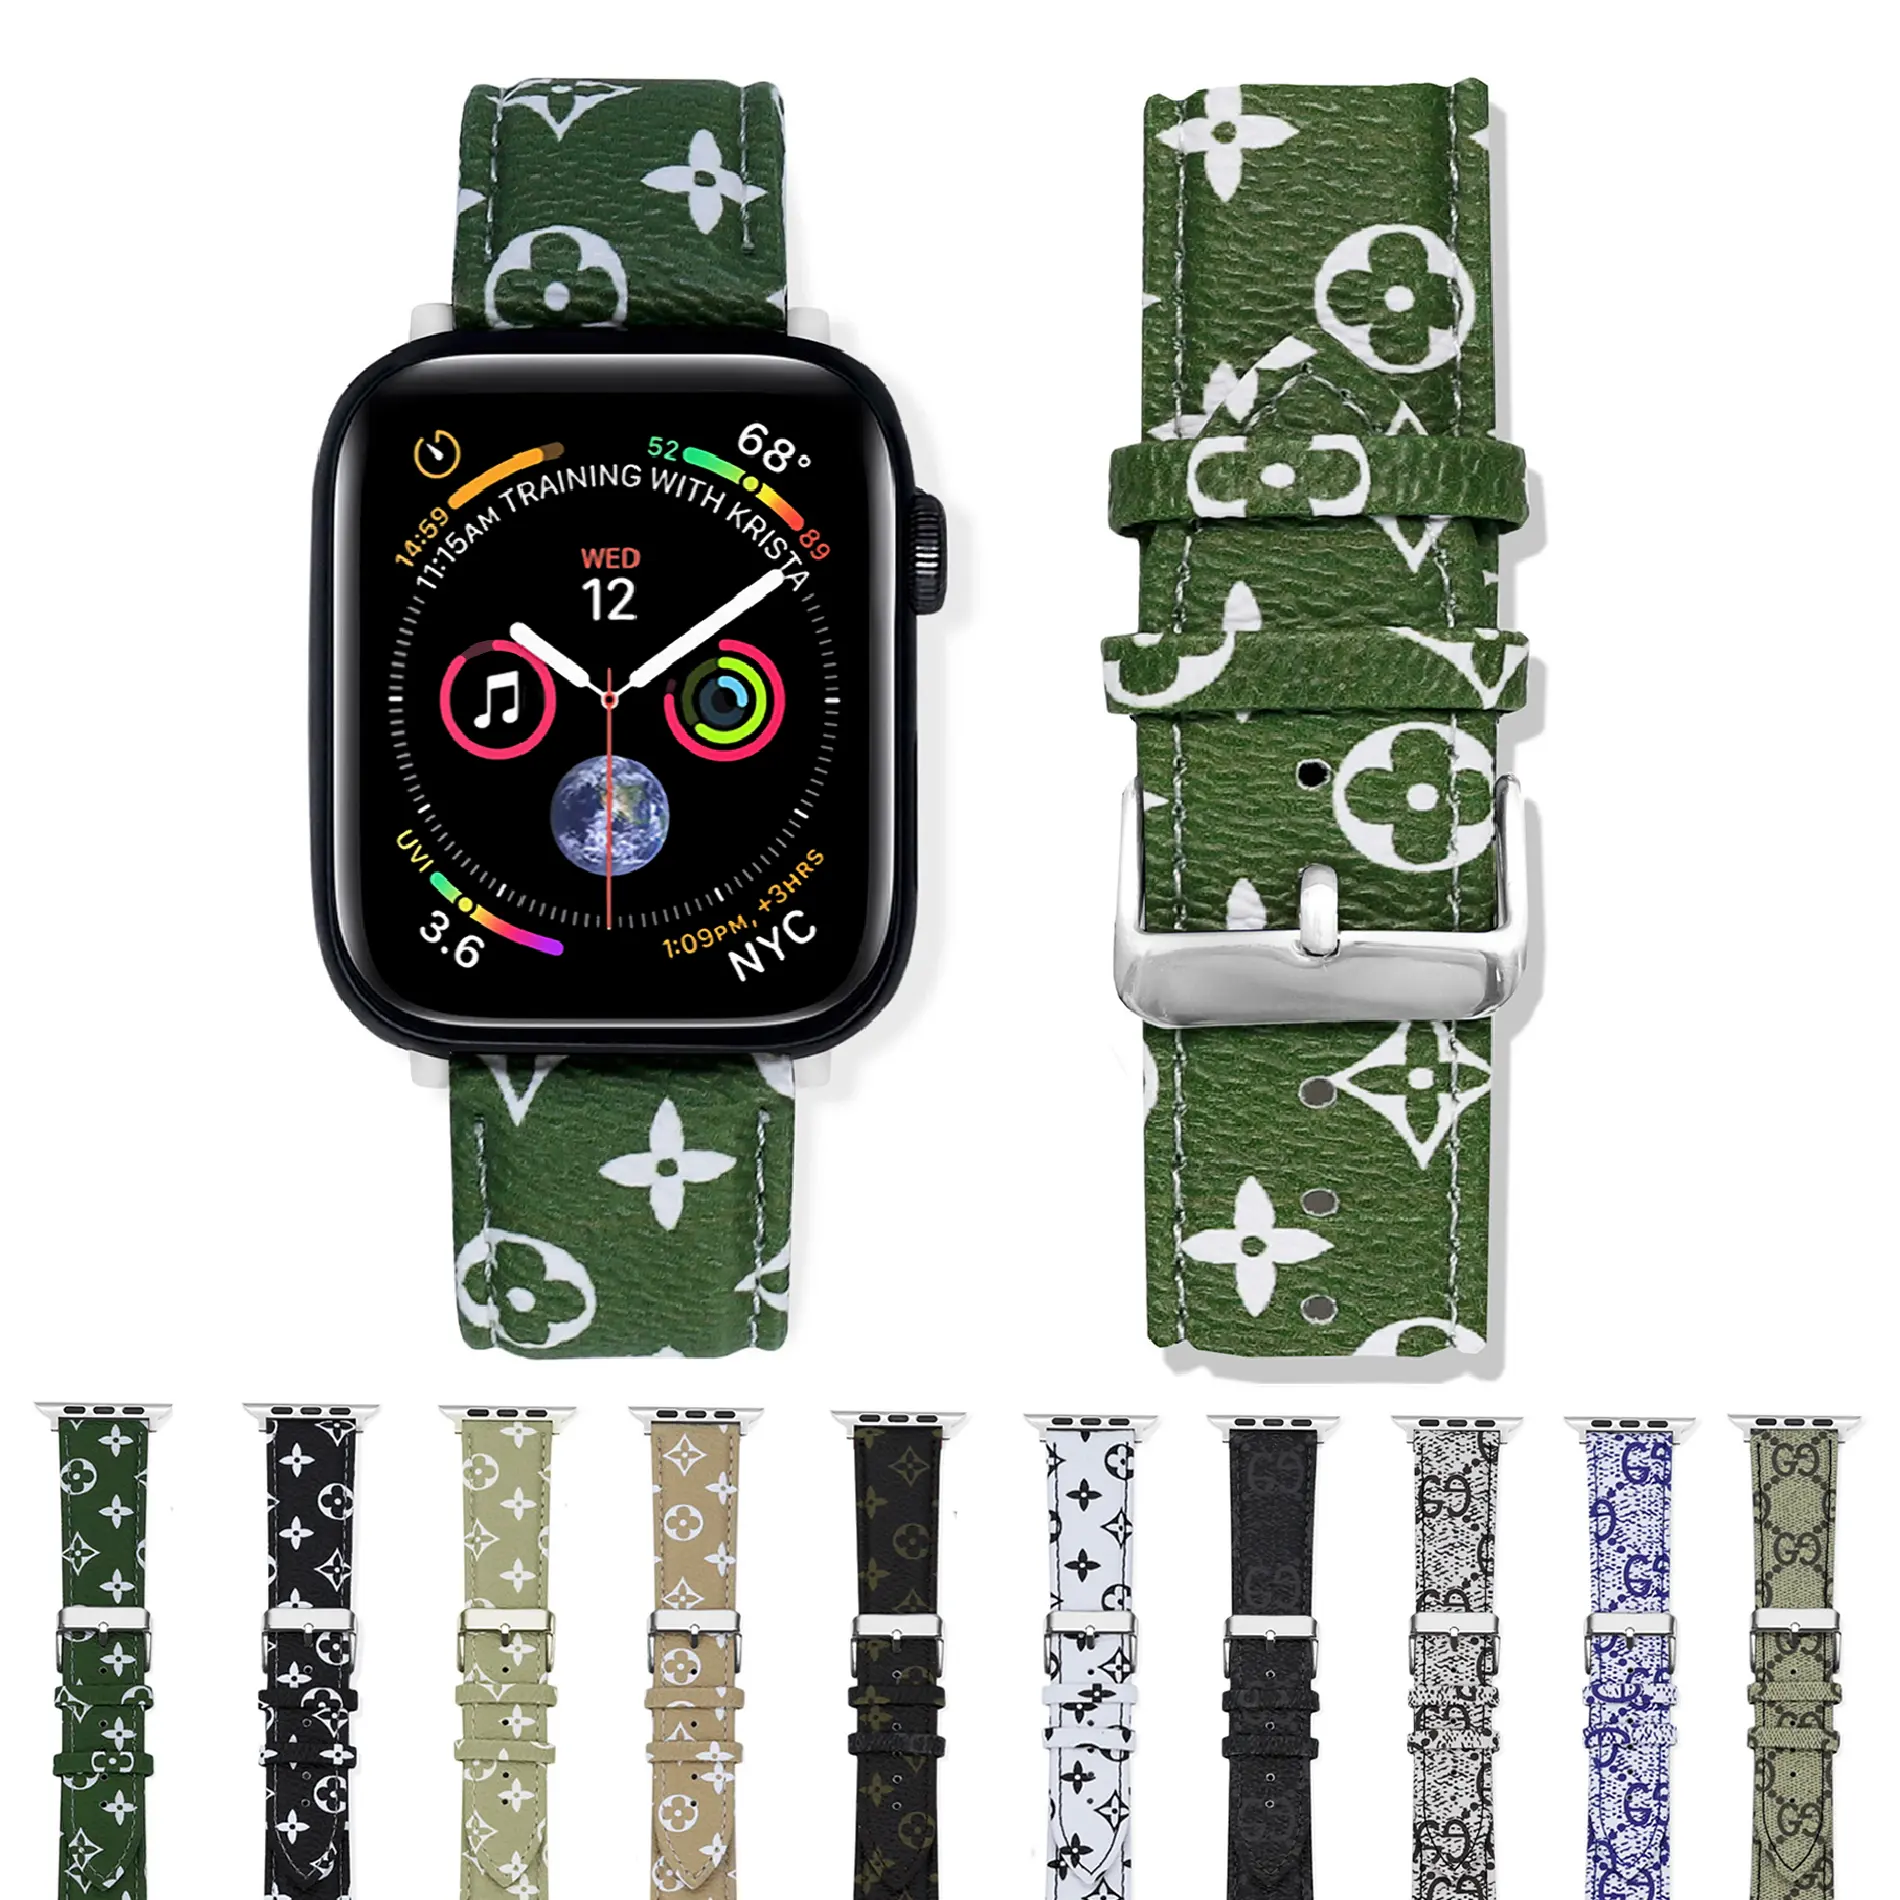 Suitable for leather printed iWatch series strap suitable for Apple 38 40 42 44 45 mm smart watch strap leather waterproof strap